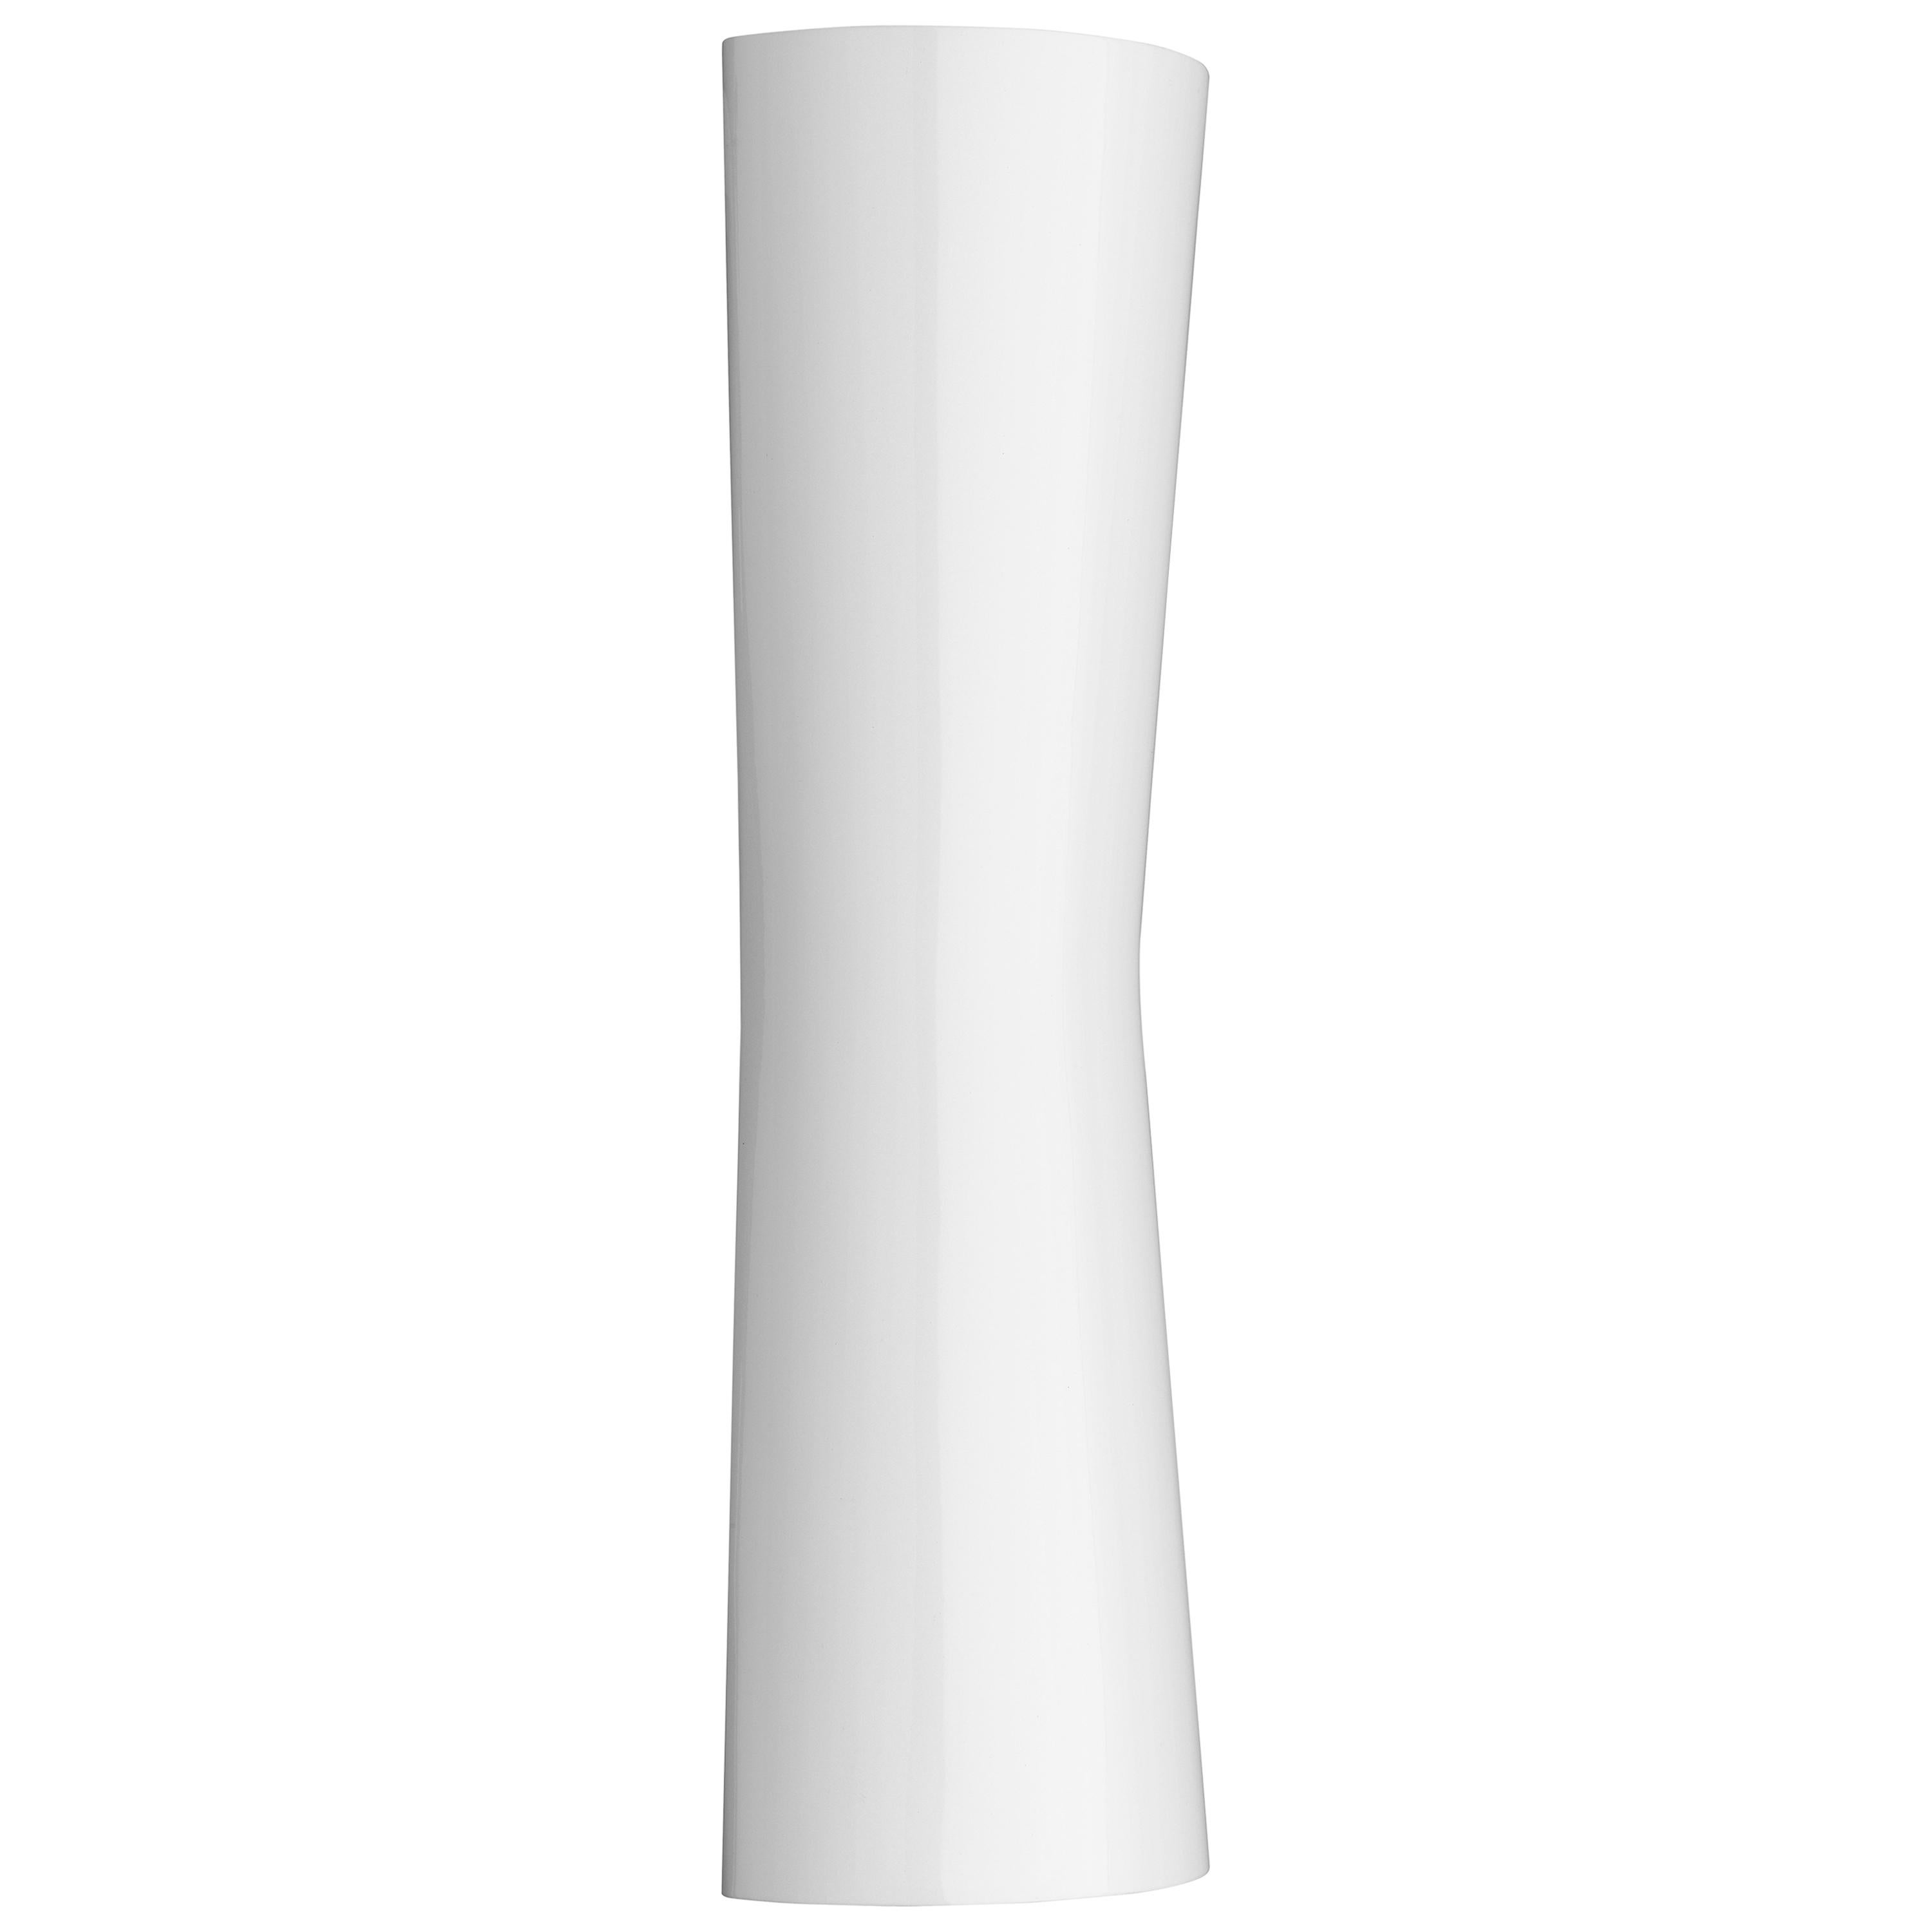 FLOS Clessidra 40° + 40° Indoor Wall Lamp in Glossy White by Antonio Citterio